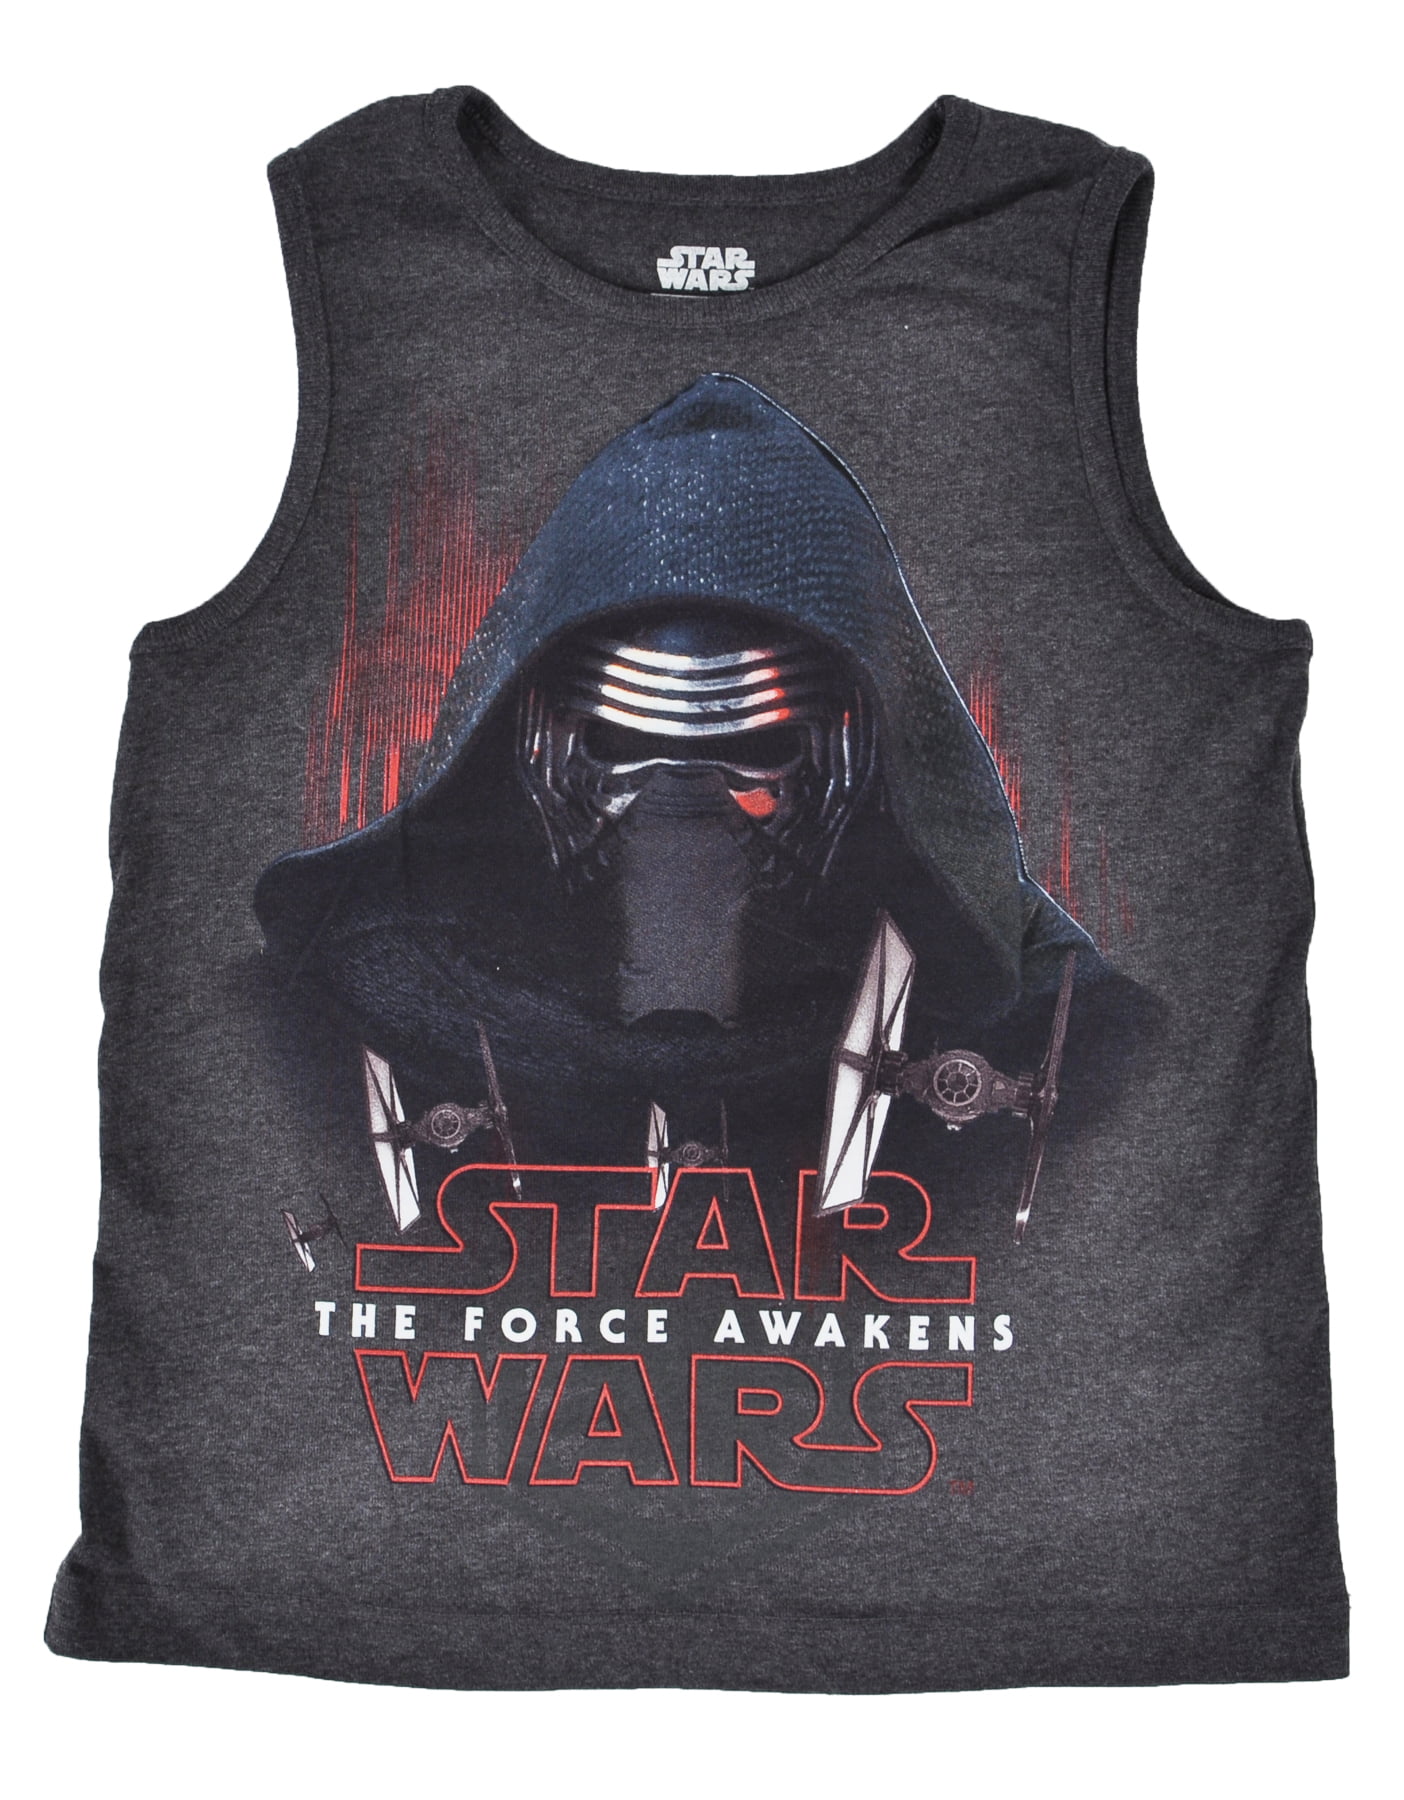 Boys Star Wars Troop Leader First Order Kylo Ren Tank Vest Top Sizes from 4 to 10 Years 